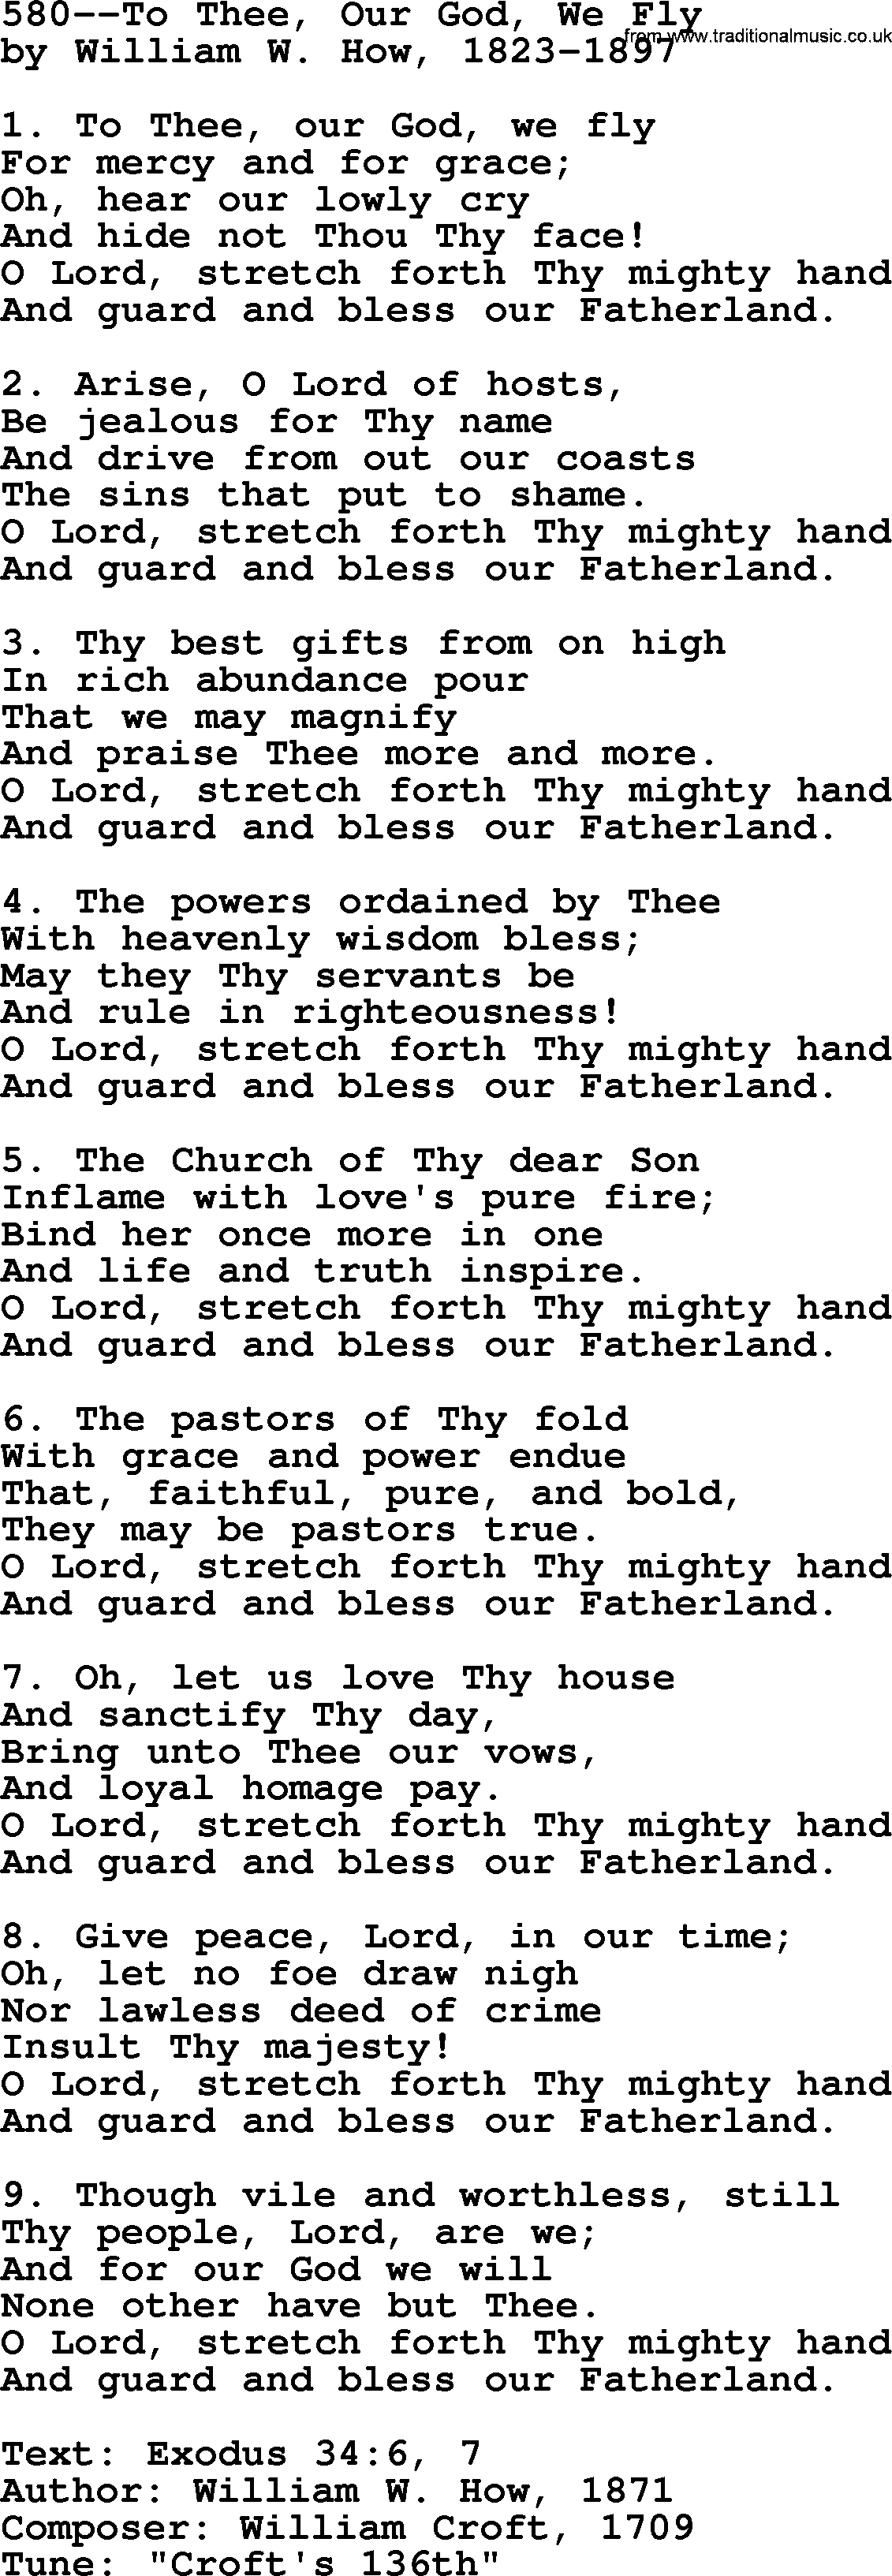 Lutheran Hymn: 580--To Thee, Our God, We Fly.txt lyrics with PDF